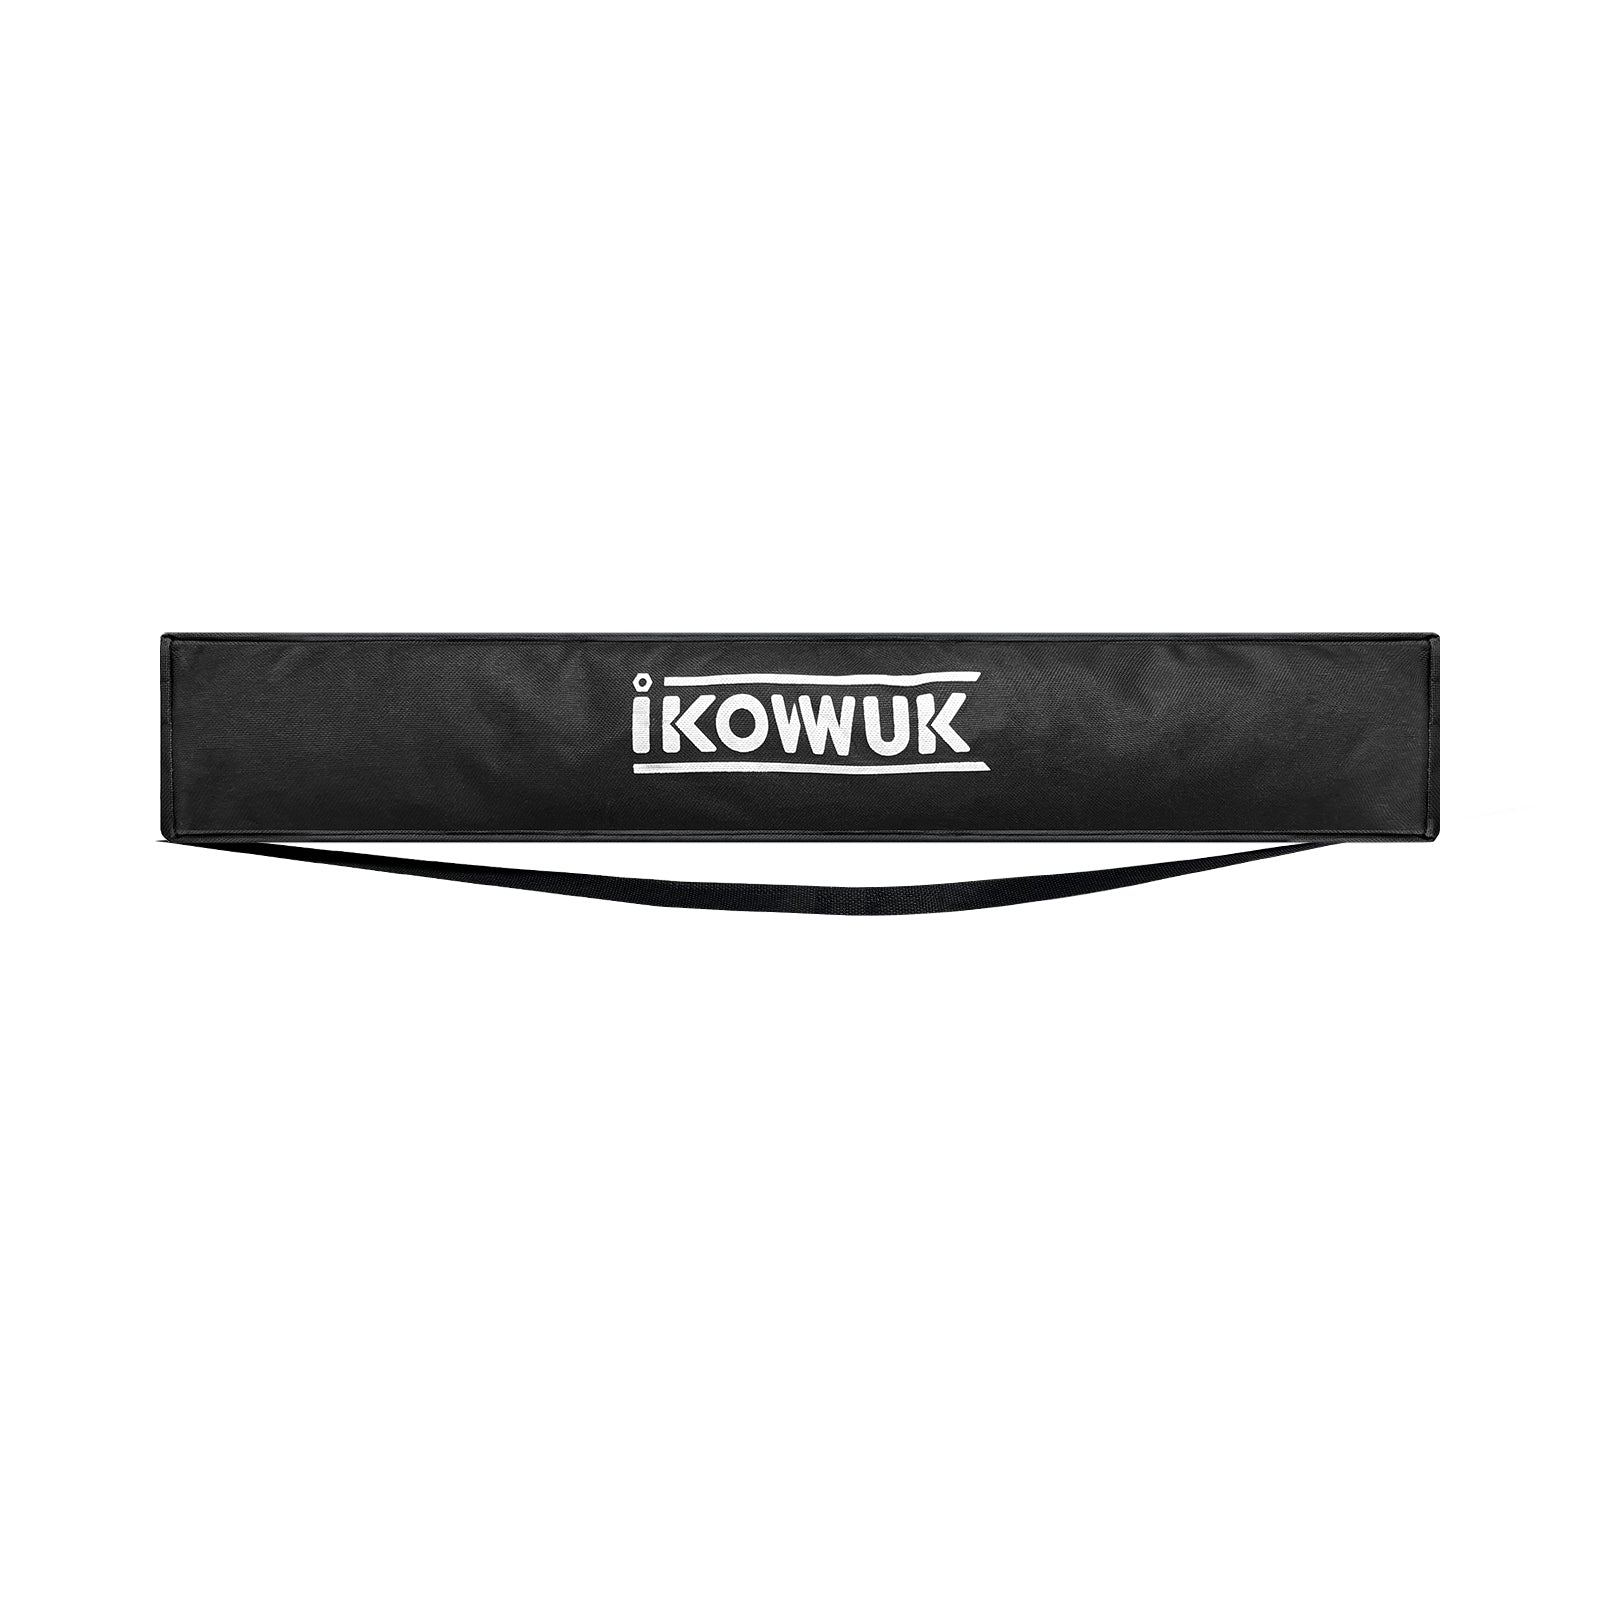 IKOVWUK 3160 Compact Tripod Tool for Laser Level, Tripod with Adjustable Height 26—65.7 Inches for Use with Point Lasers, and Laser Distance Tape Measuring Other